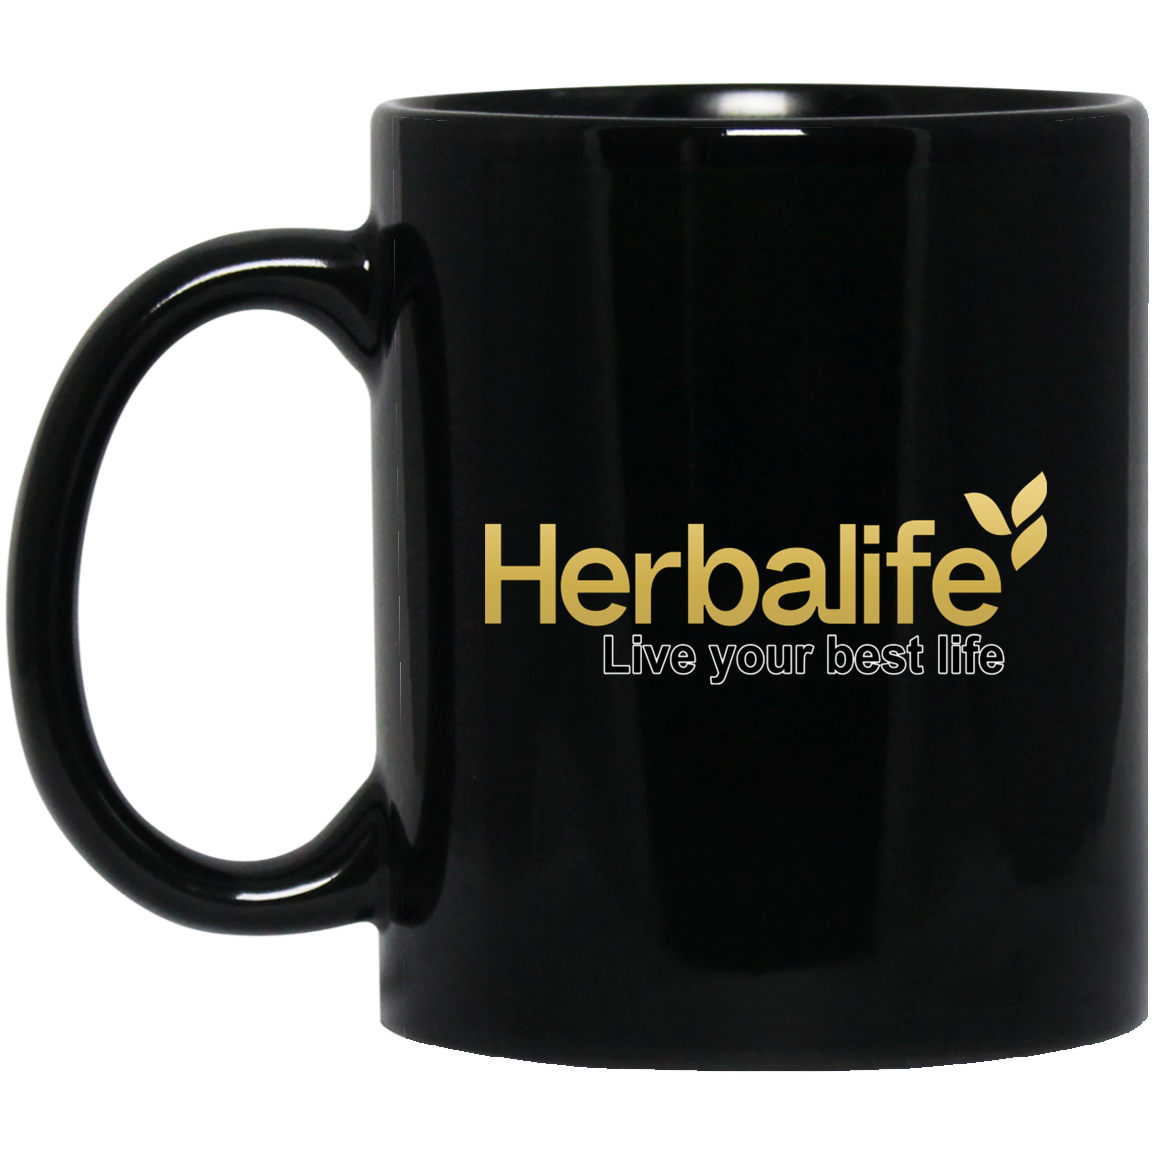 HERBALIFE DISTRIBUTOR NEW LOGO WHITE Template | PosterMyWall